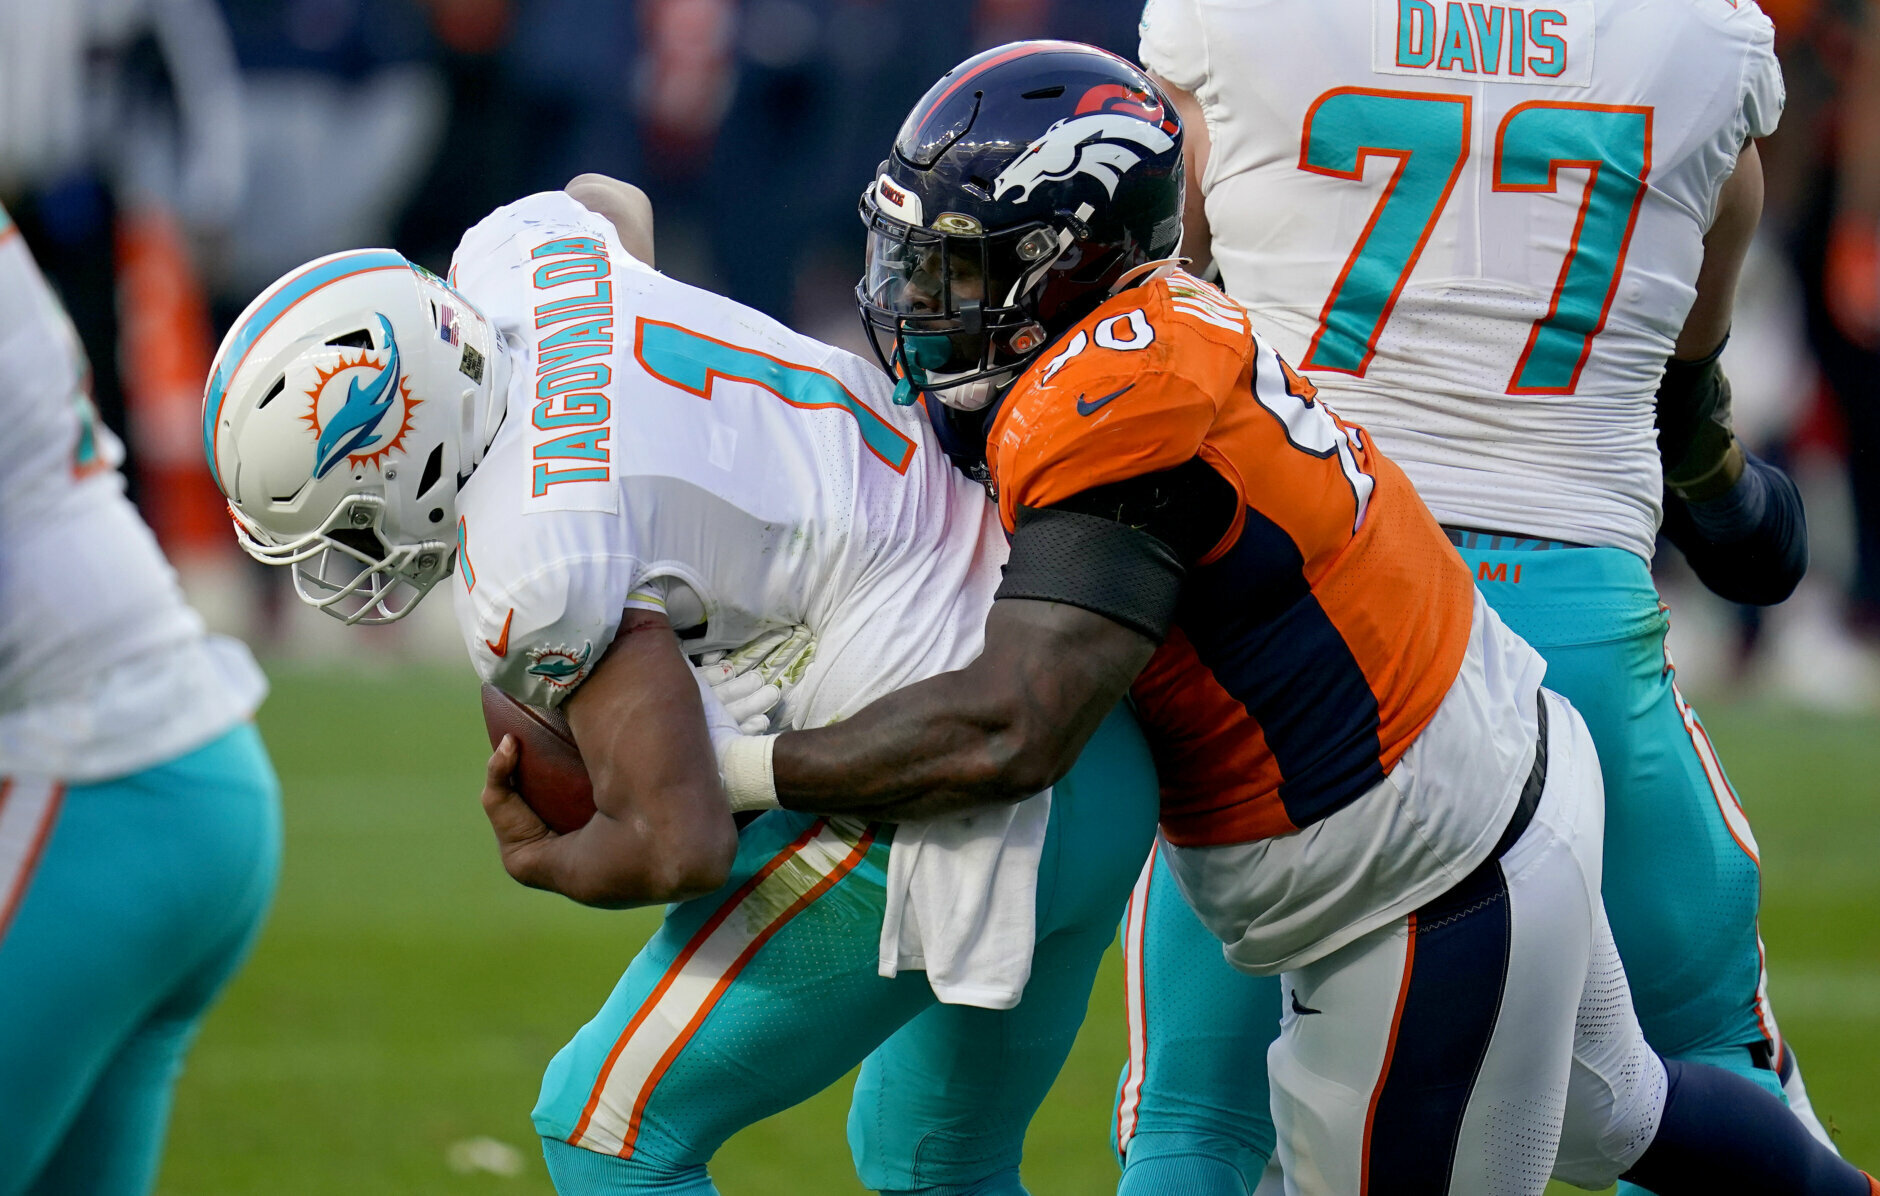 <p><b><i>Dolphins 13</i></b><br />
<b><i>Broncos 20</i></b></p>
<p>Miami&#8217;s five-game win streak and Tua&#8217;s <a href="https://profootballtalk.nbcsports.com/2020/11/17/tua-tagovailoa-aims-to-be-first-rookie-qb-since-ben-roethlisberger-to-win-first-4-starts/">bid for history</a> came to a screeching halt in Denver, but coach Brian Flores did the right thing by saving his young QB&#8217;s life — he took six sacks — and seeing if Fitzmagic could bail them out. The Fins will be fine thanks to back-to-back games against the winless Jets and Burrow-less Bengals.</p>
